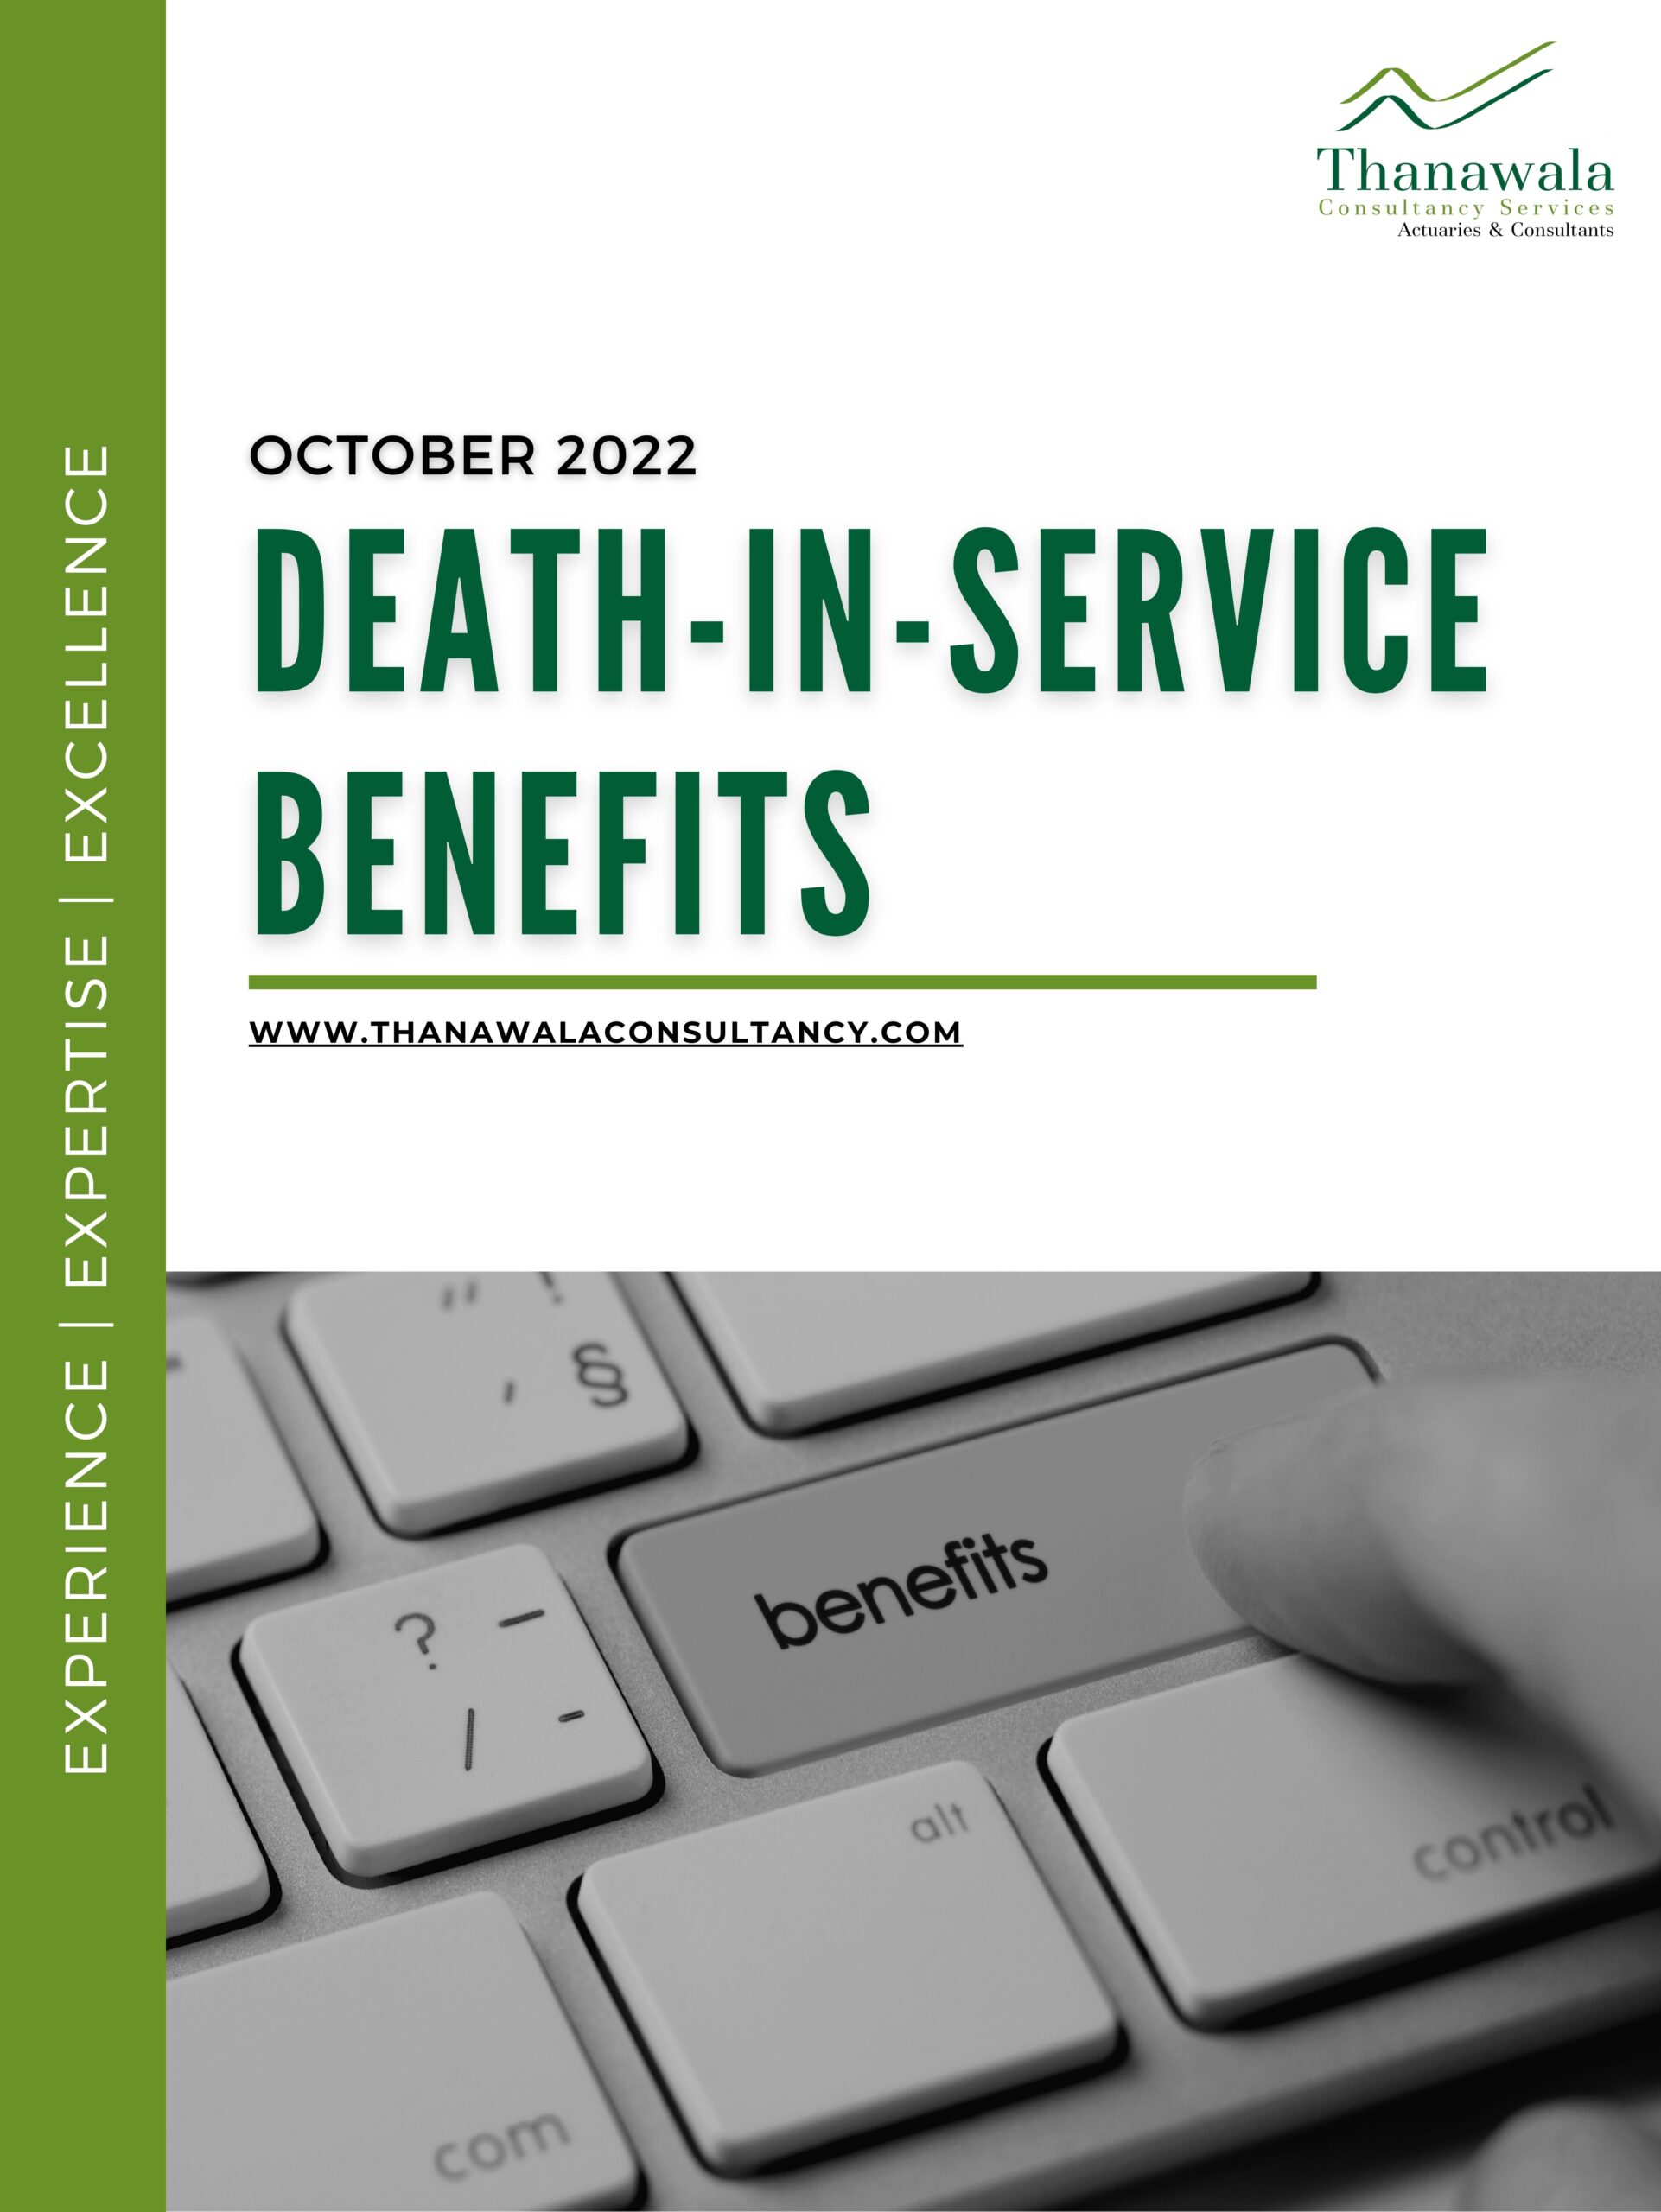 https://thanawalaconsultancy.com/wp-content/uploads/2022/11/death-in-services--scaled.jpg